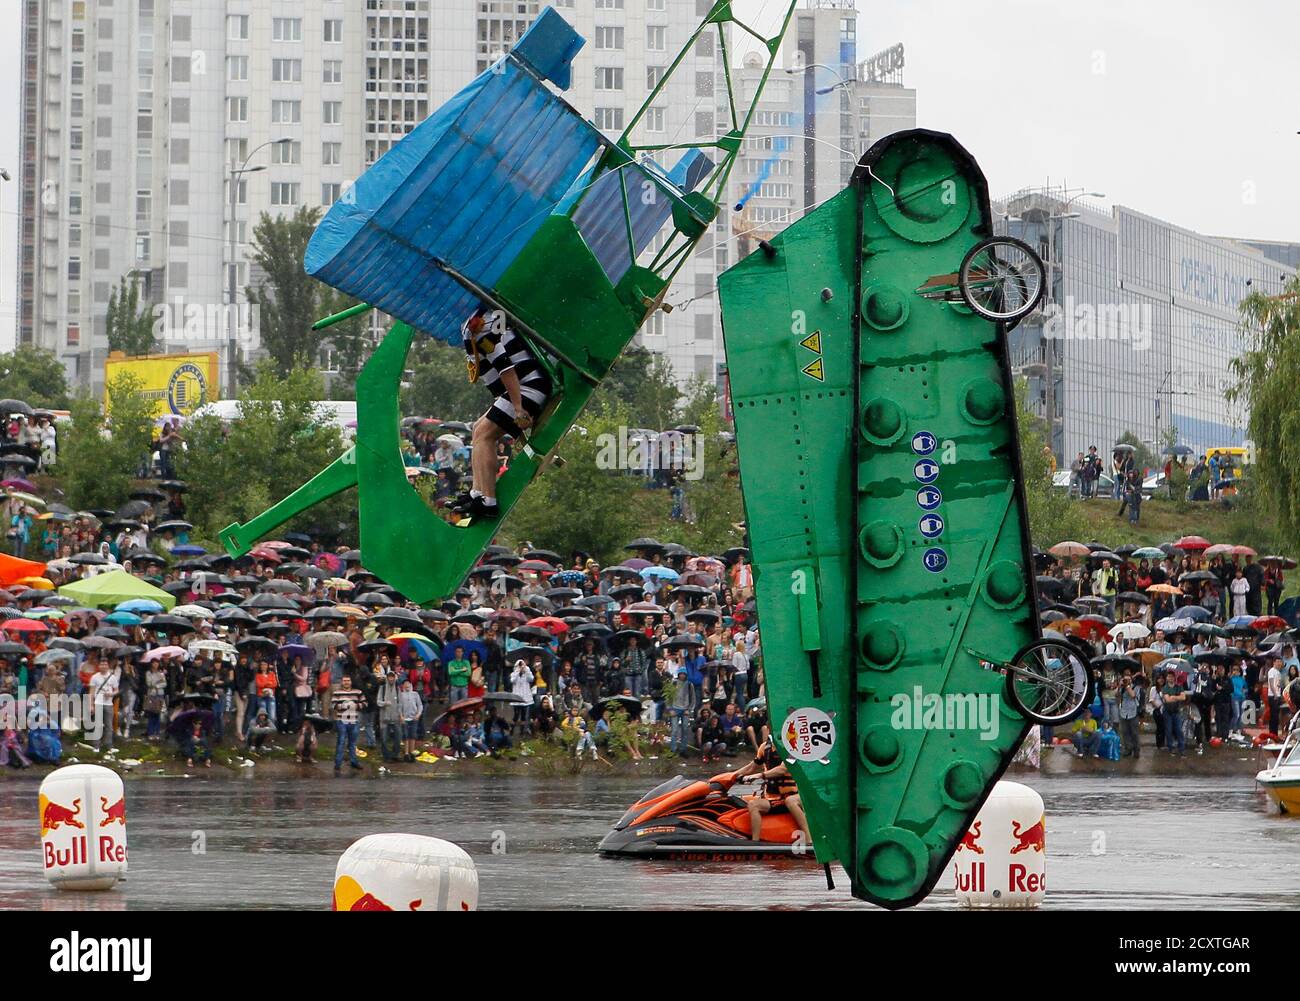 fremsætte lemmer sikkert A participant operates a homemade flying machine during the Red Bull  Flugtag (Flight Day) event in Kiev June 2, 2013. REUTERS/Gleb Garanich  (UKRAINE - Tags: SOCIETY Stock Photo - Alamy